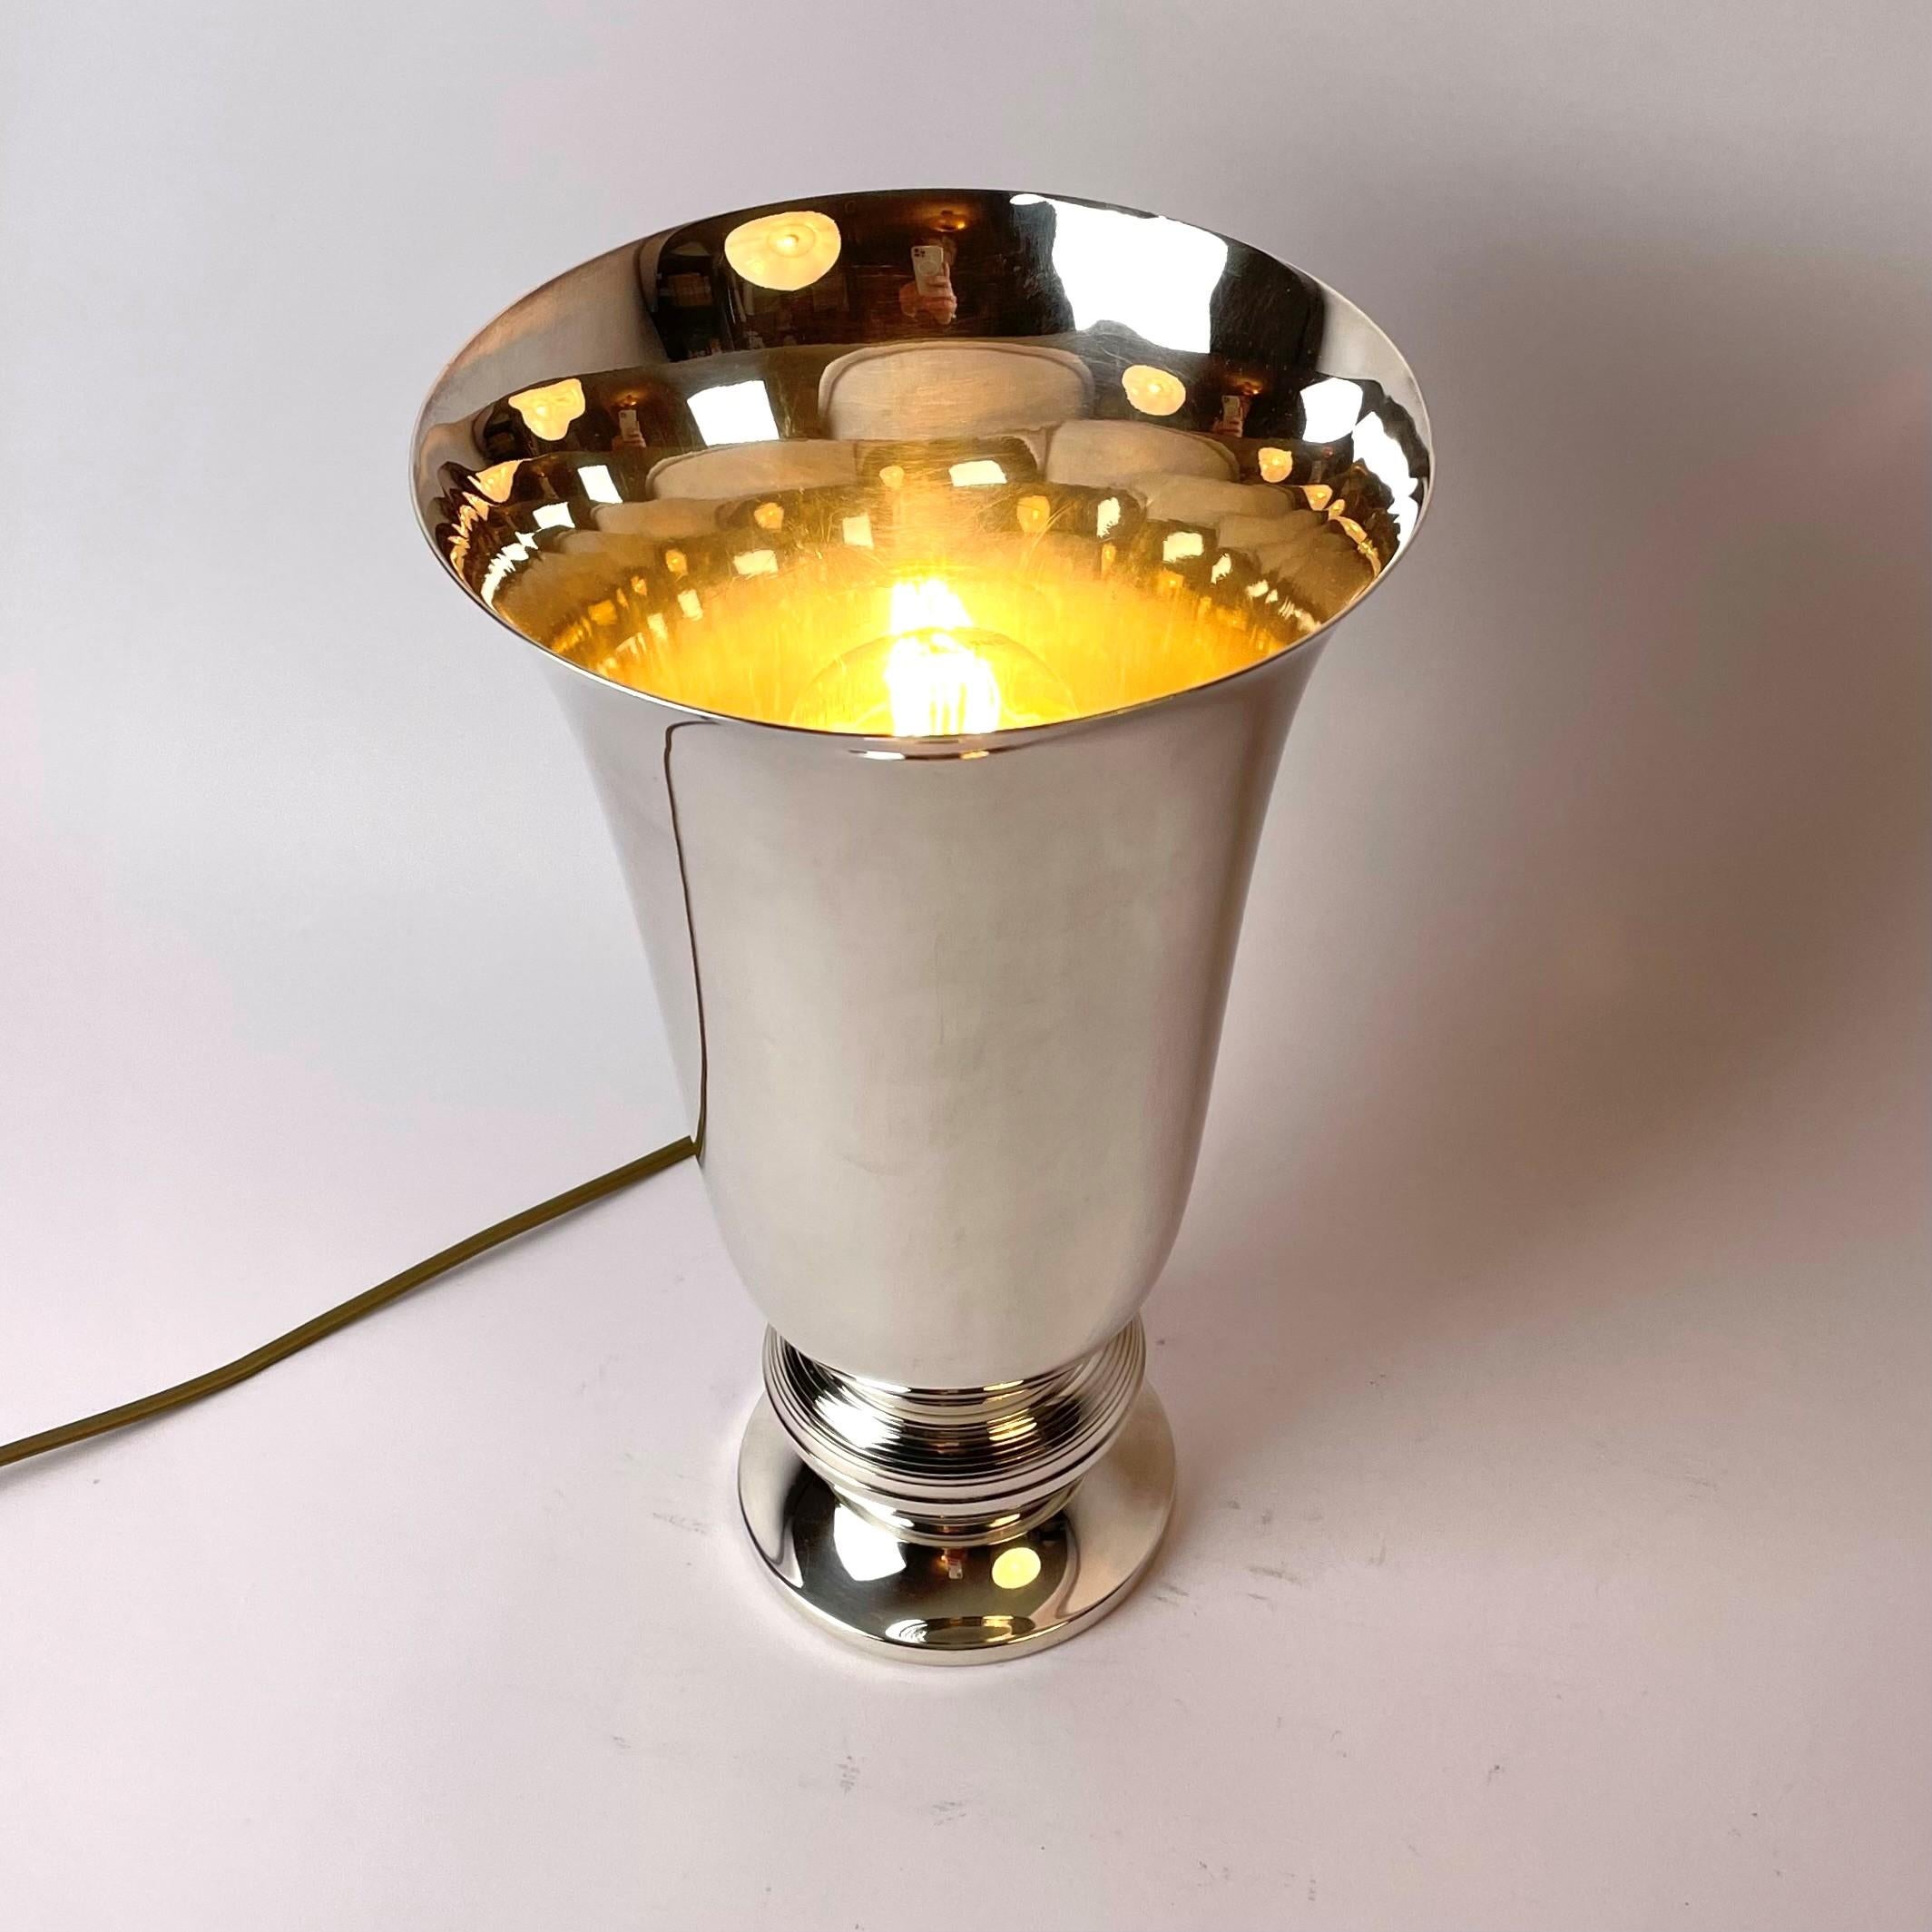 An elegant silver plated Uplight for a table in Art Deco, probably from the late 1920s.

Newly installed electric cord.

Wear consistent with age and use